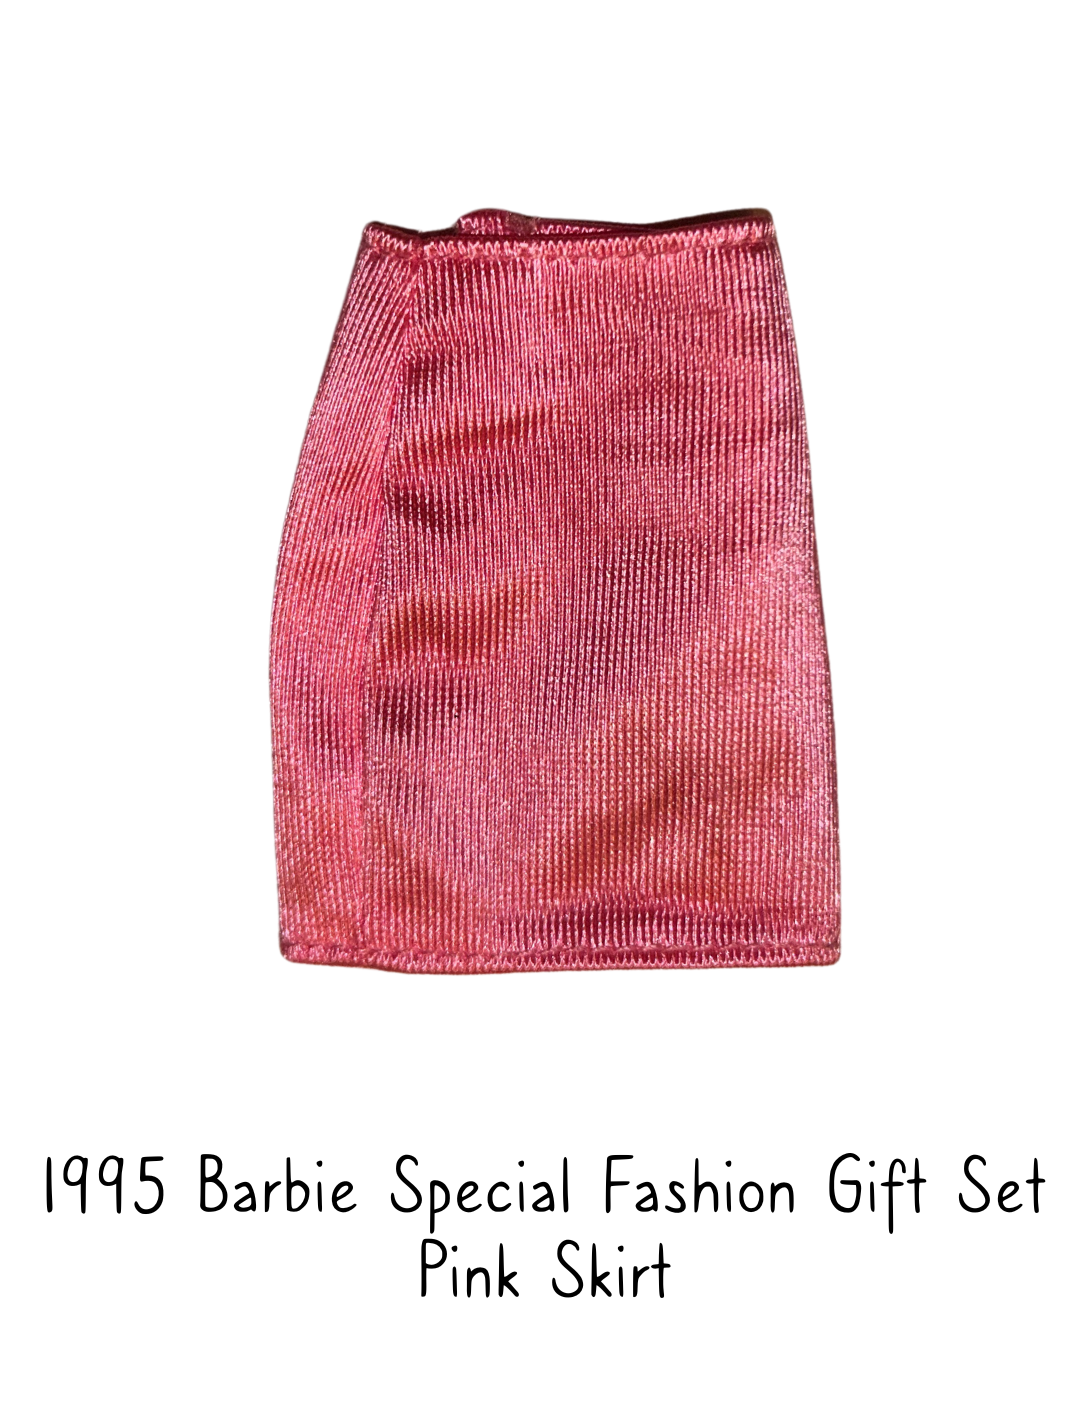 1995 Barbie Special Fashion Gift Set Pink Skirt